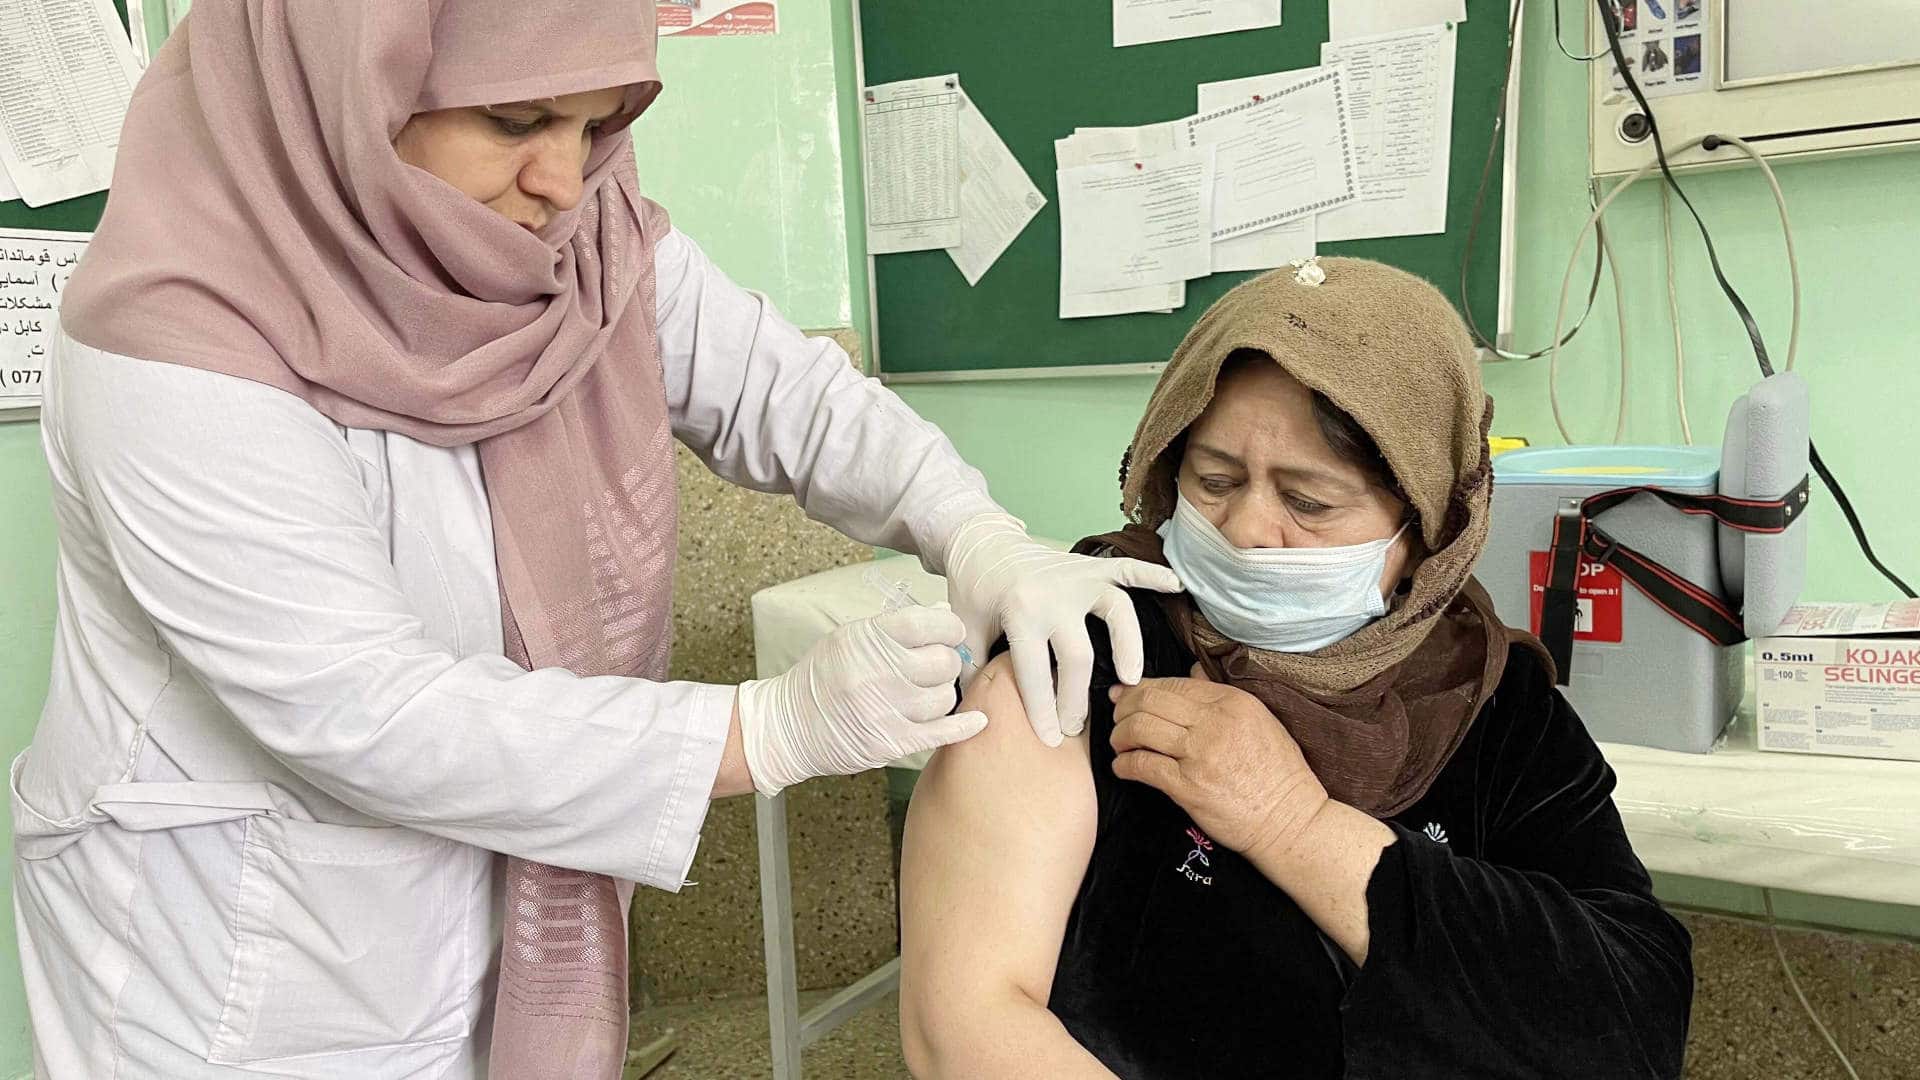 An Afghan health worker receives a dose of the Indian version of the AstraZeneca coronavirus vaccine at Wazir Akbar Khan Hospital in Kabul, Afghanistan on February 27, 2021.